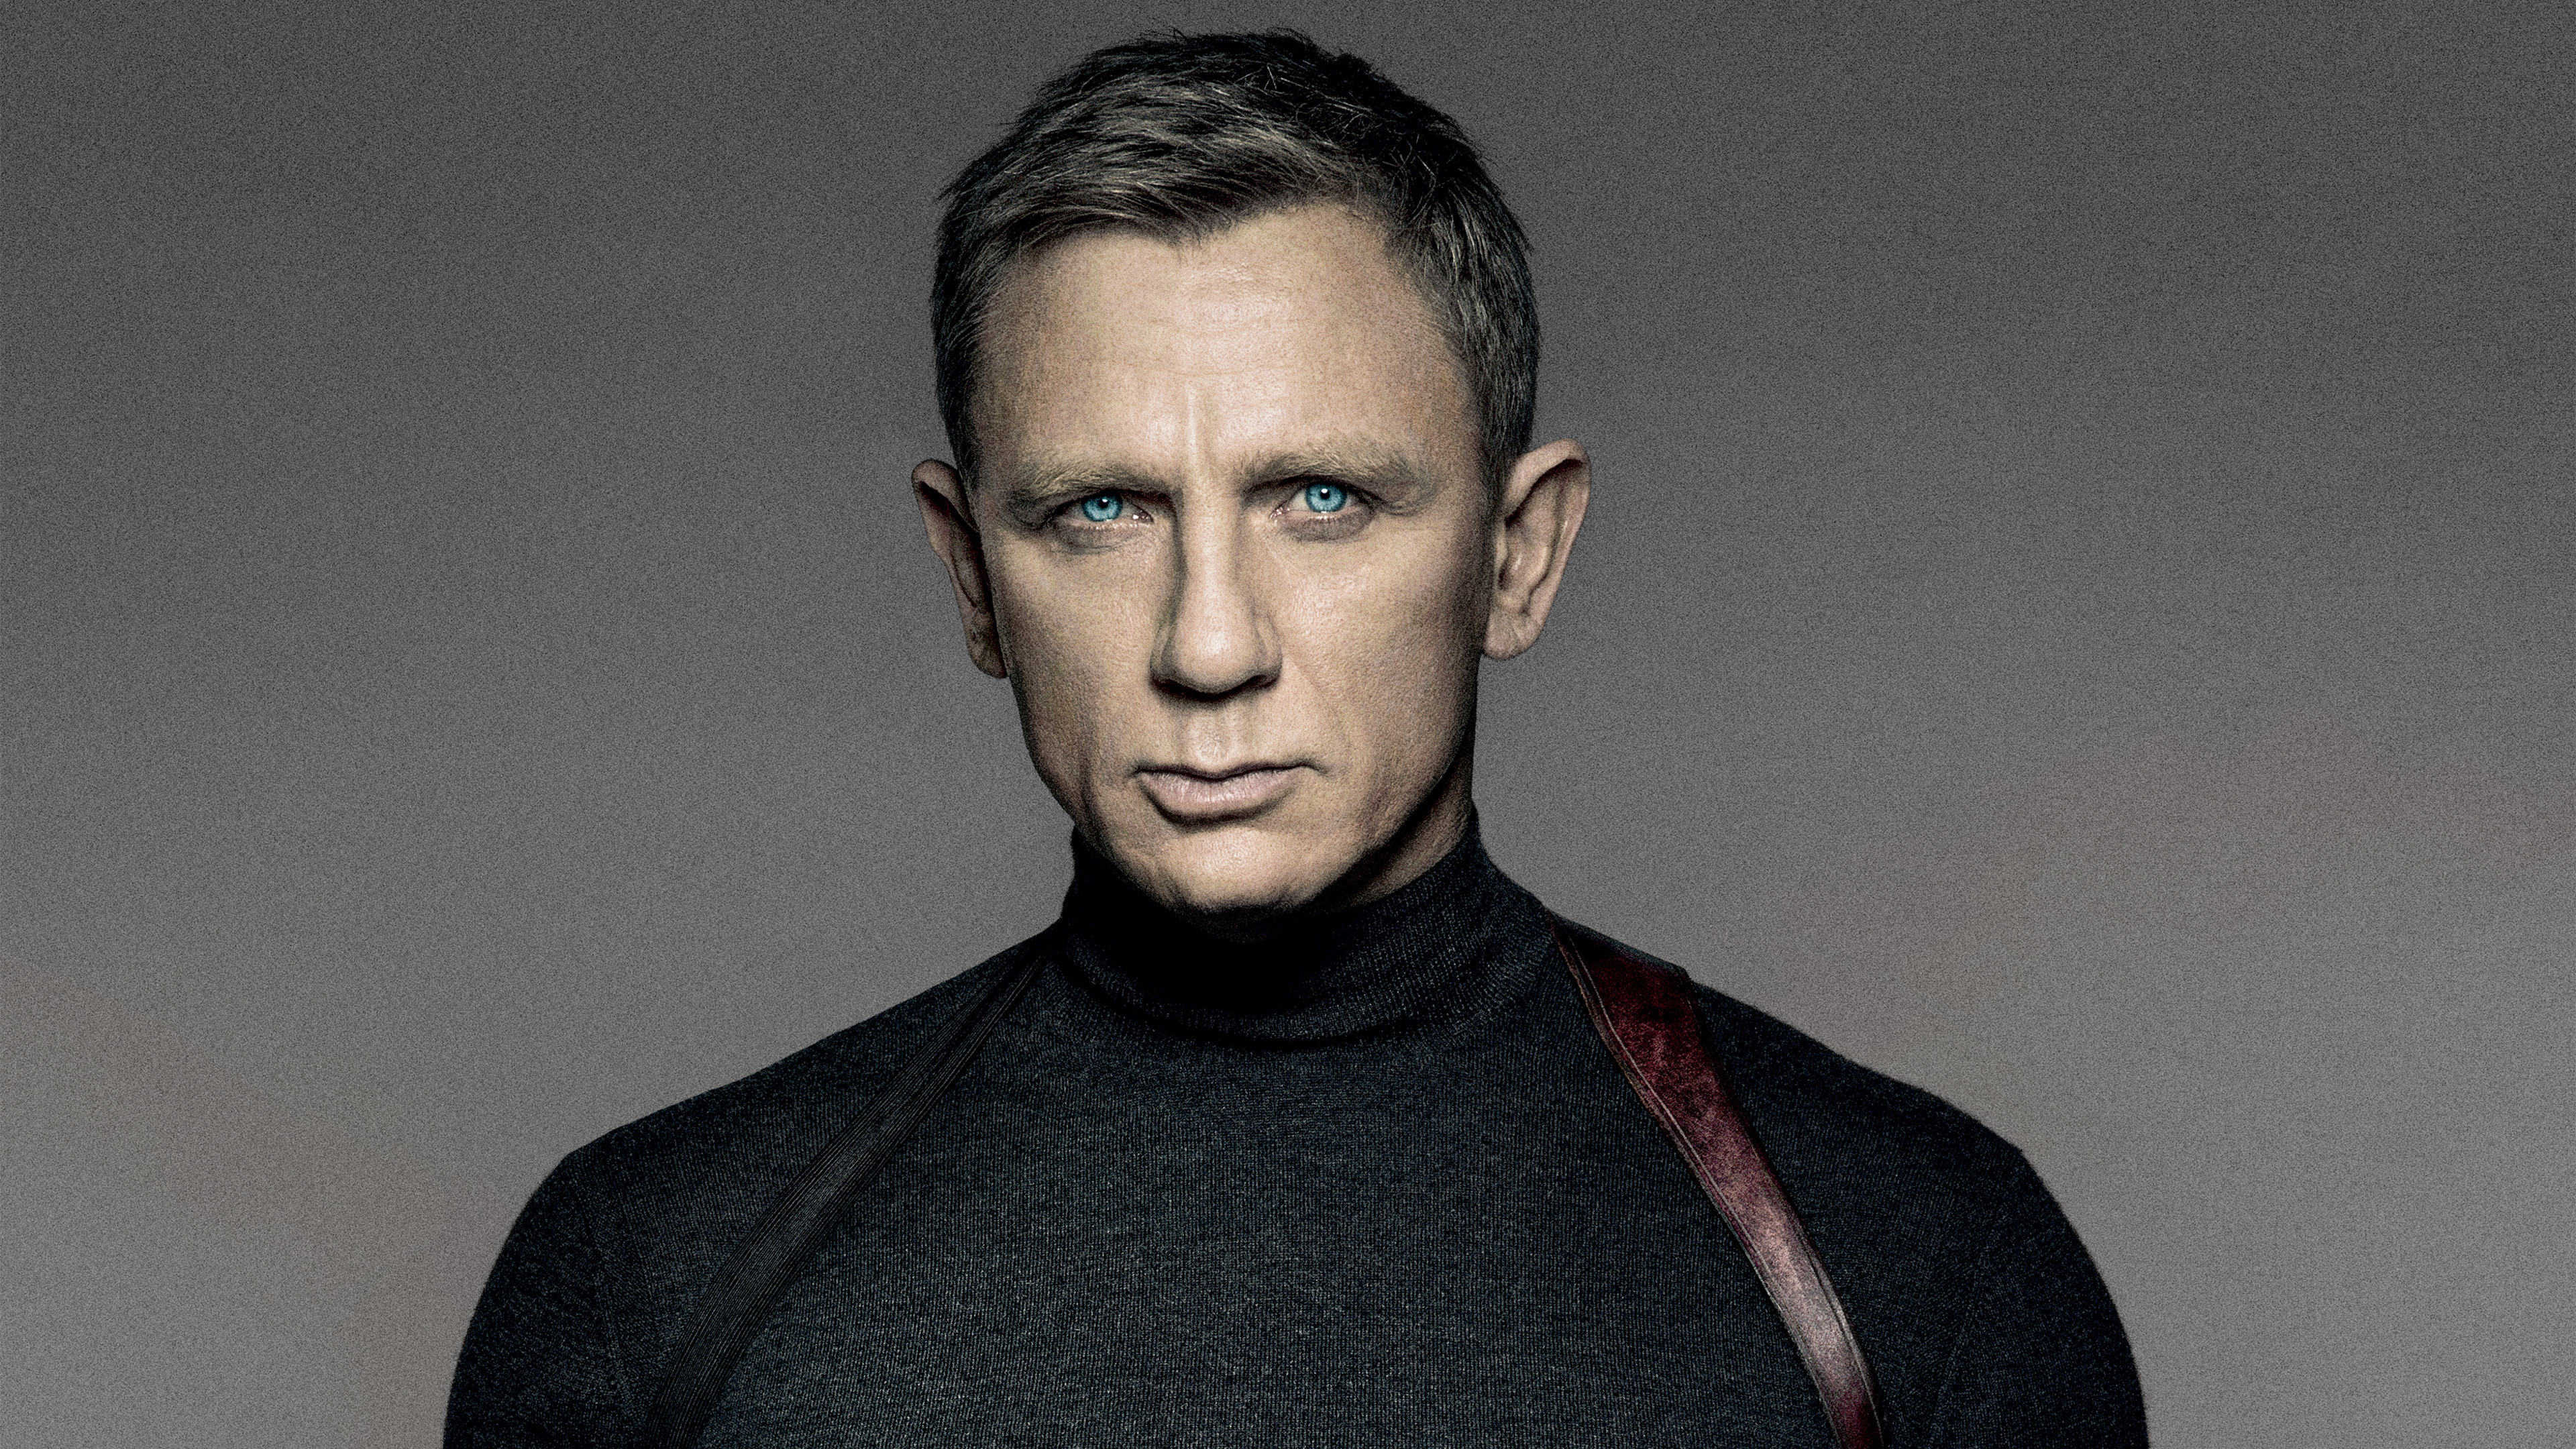 Image from the movie "SPECTRE"